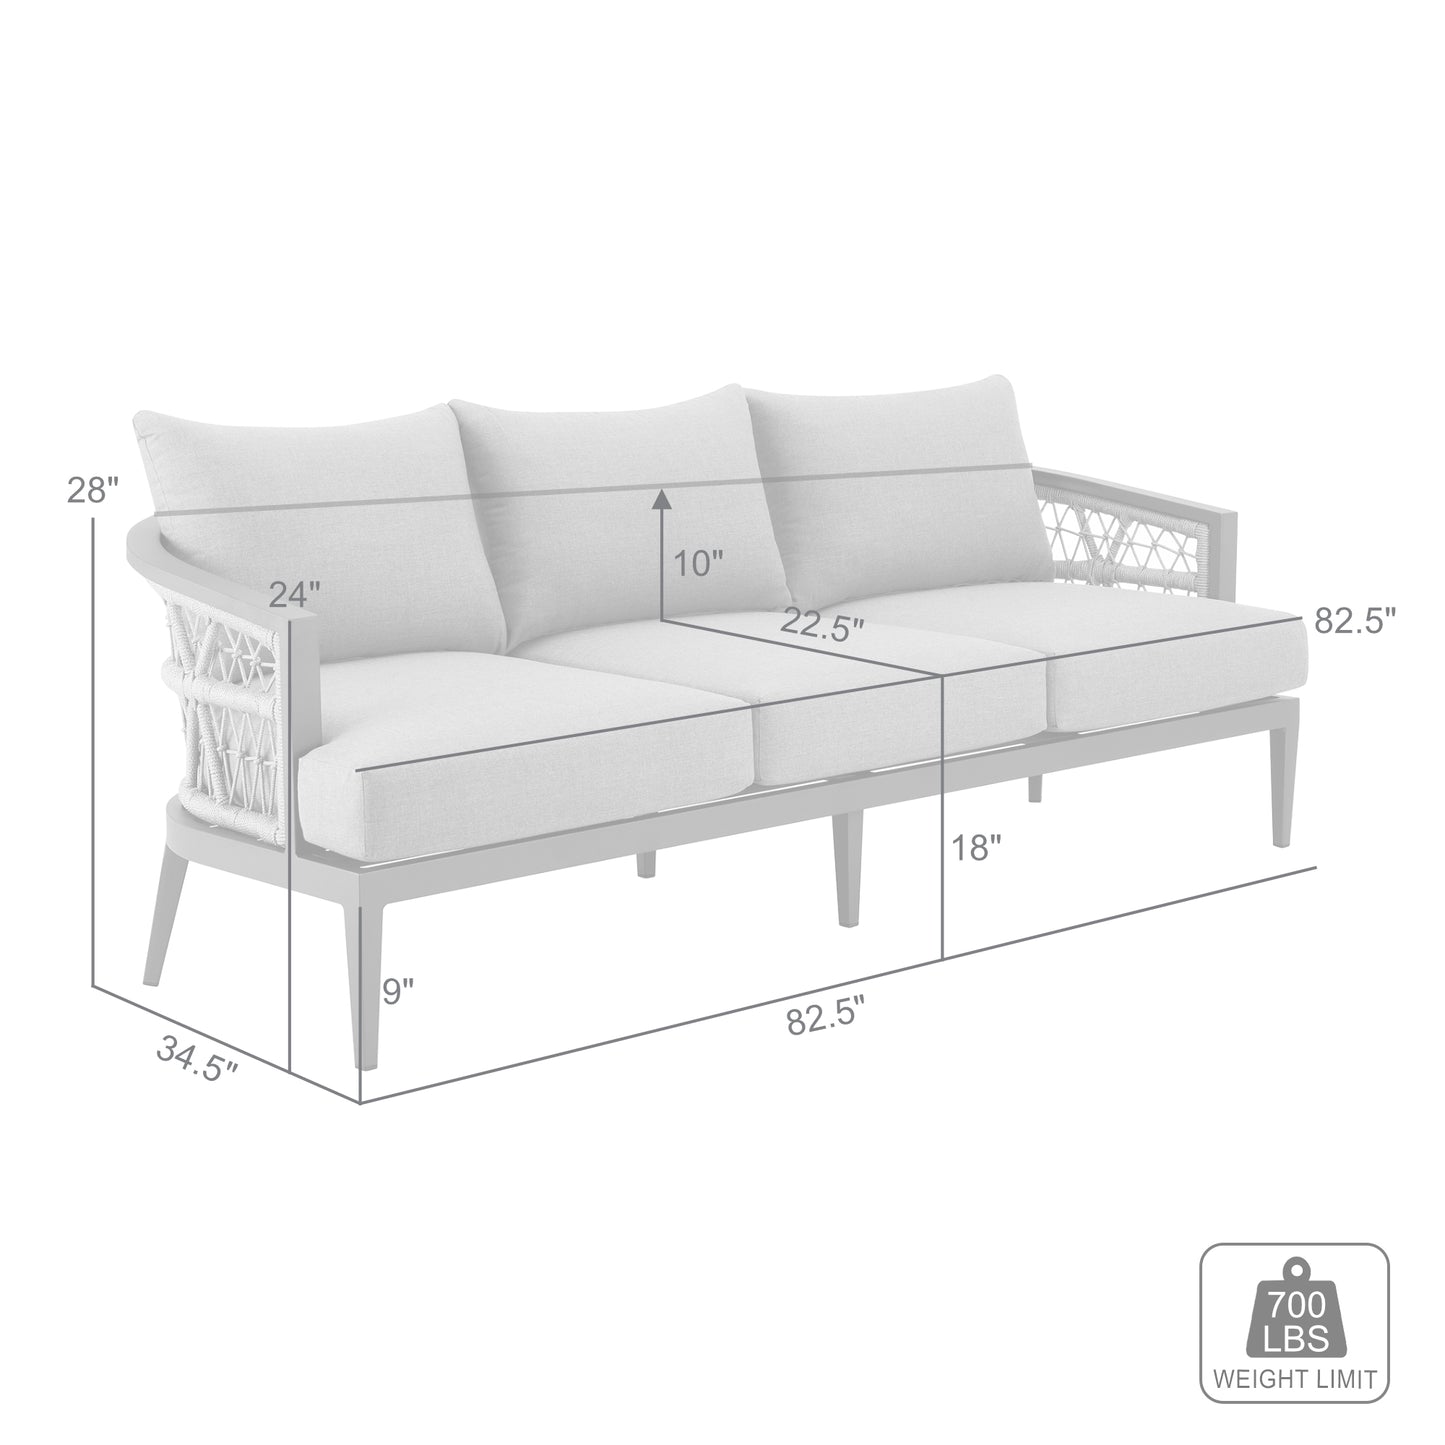 Zella Outdoor Patio Sofa in Aluminum with Light Gray Rope and Earl Gray Cushions